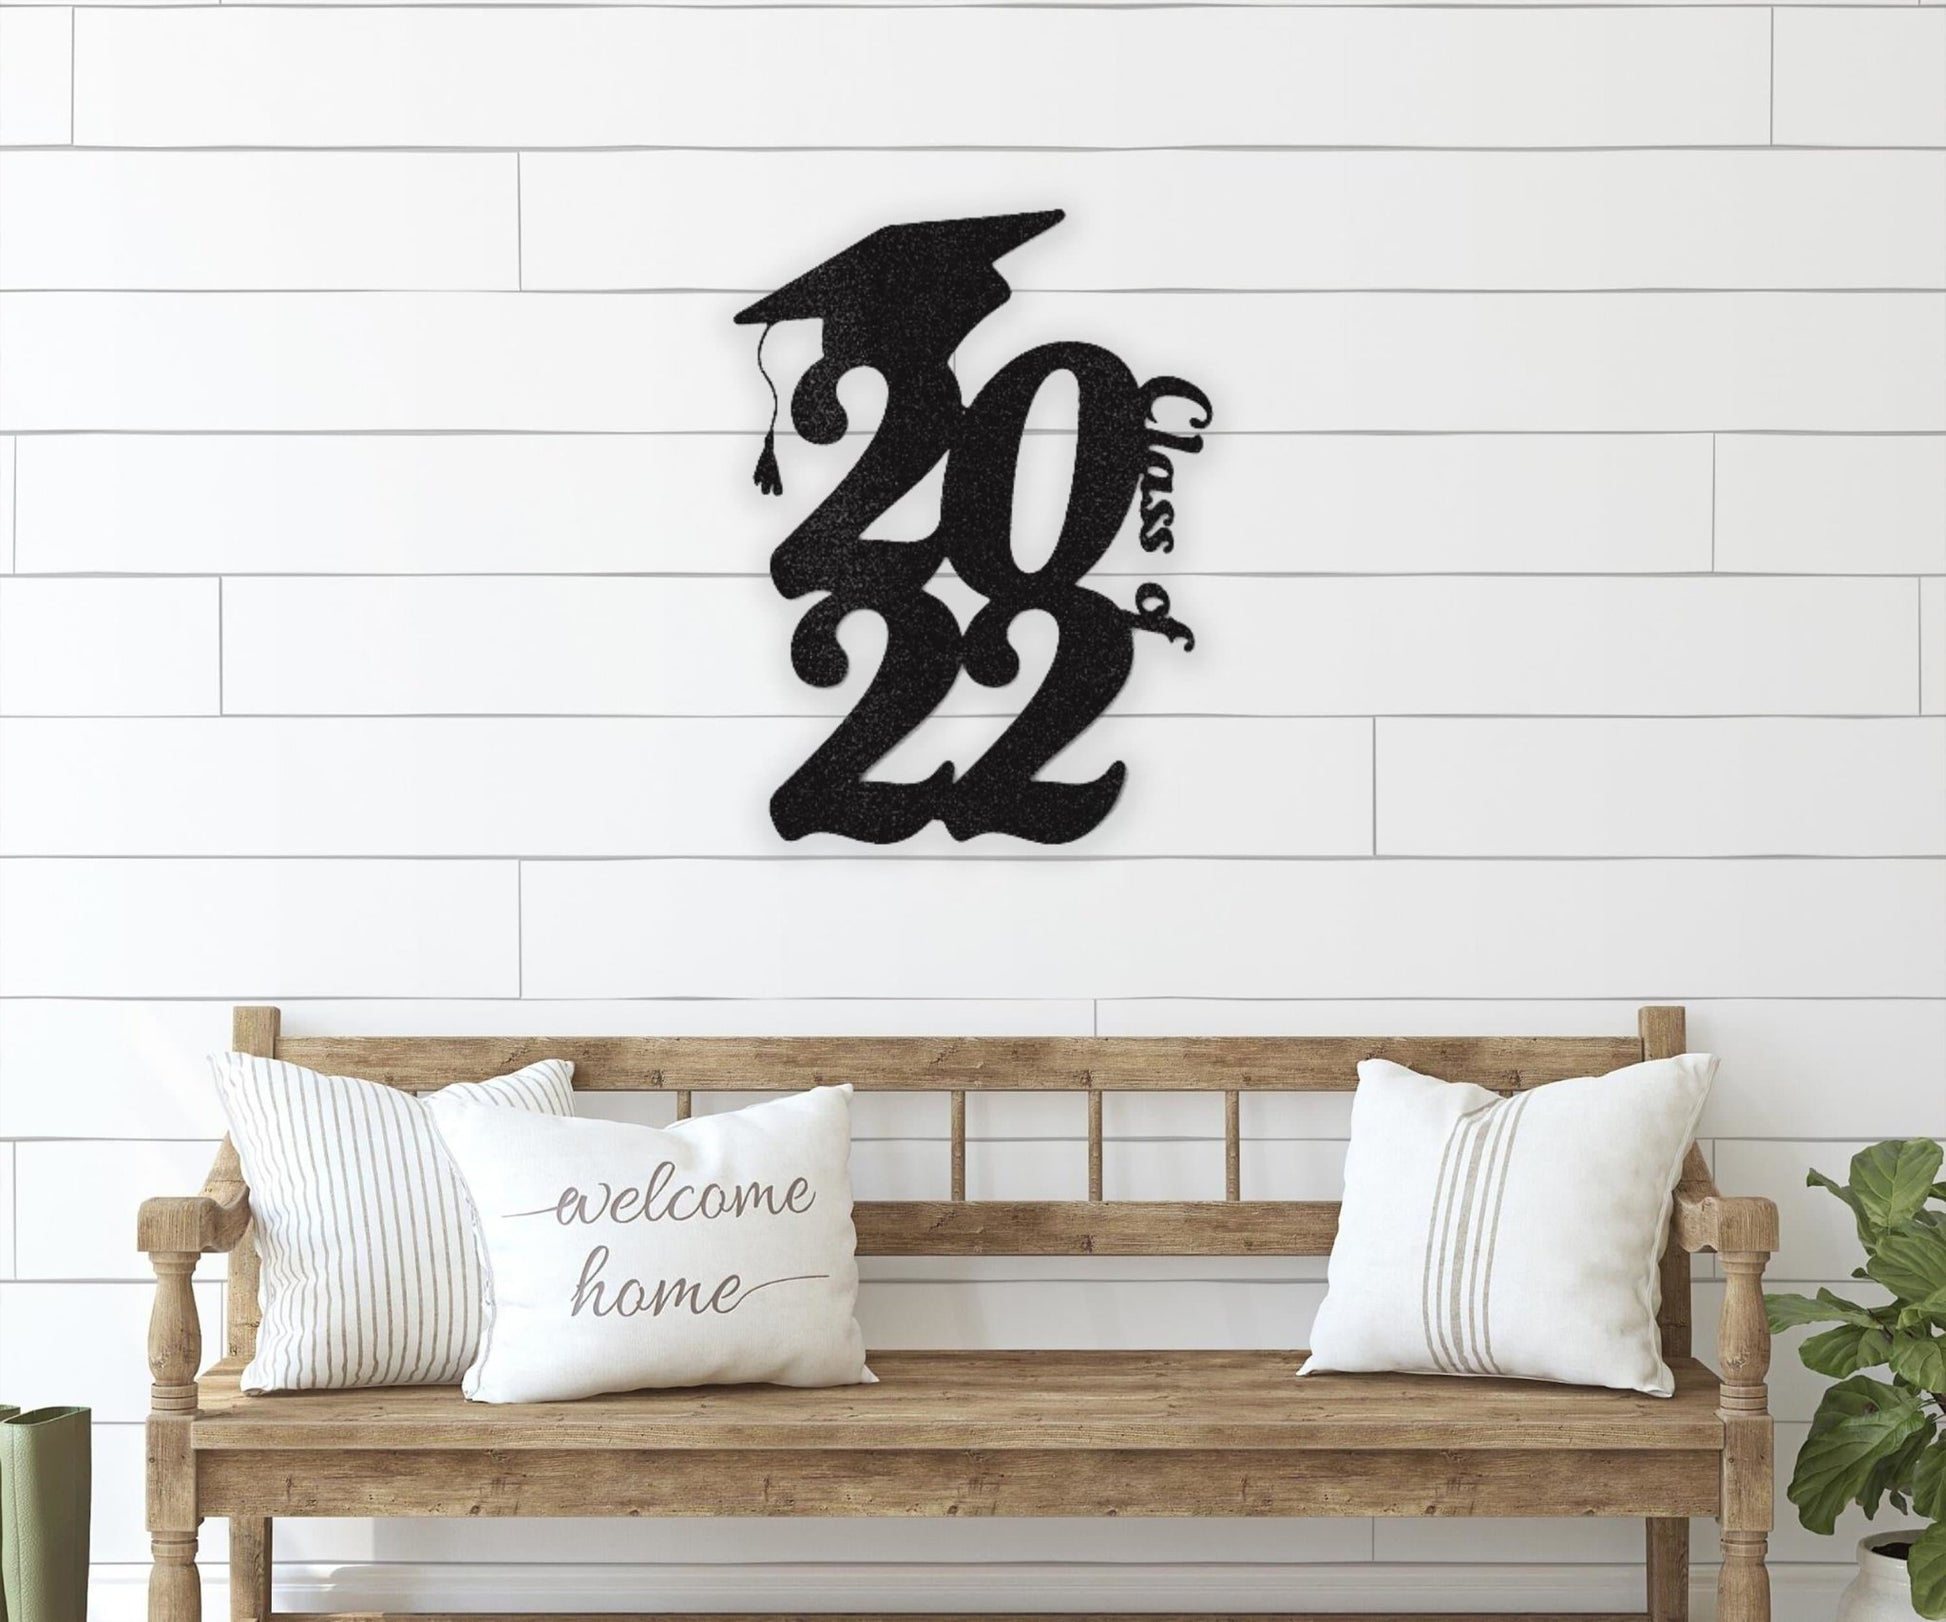 Class of 2022 Graduation Gift - Celebrate the Achievement with a Metal Sign for High School Graduation - Stylinsoul